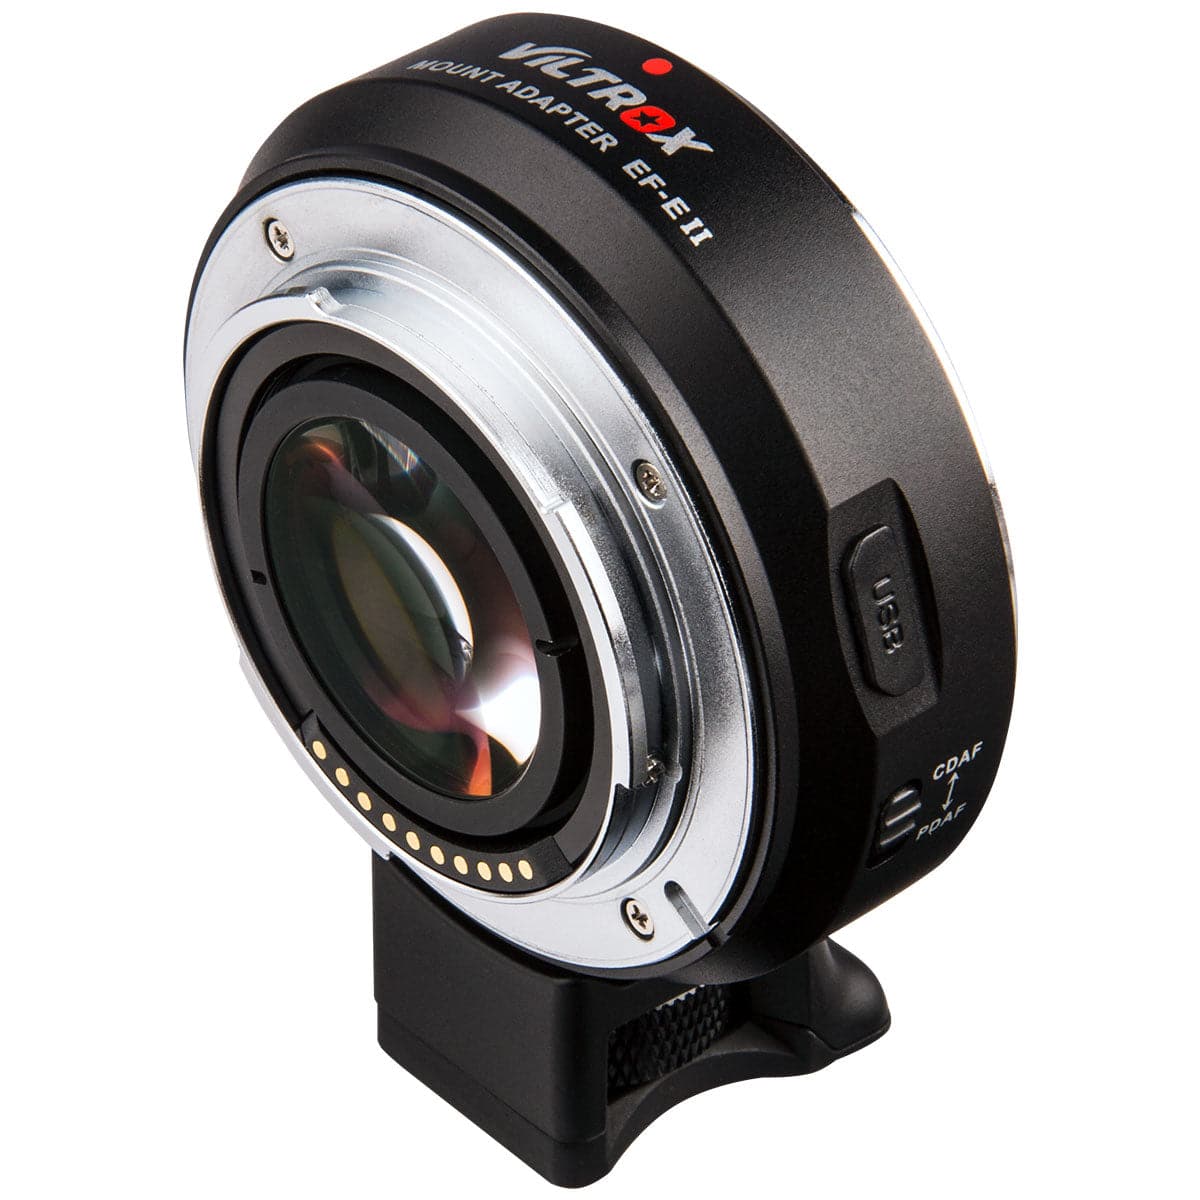 VILTROX EF-E II Auto Focus  Booster Lens Adapter for Canon EF Lens to Sony E-Mount